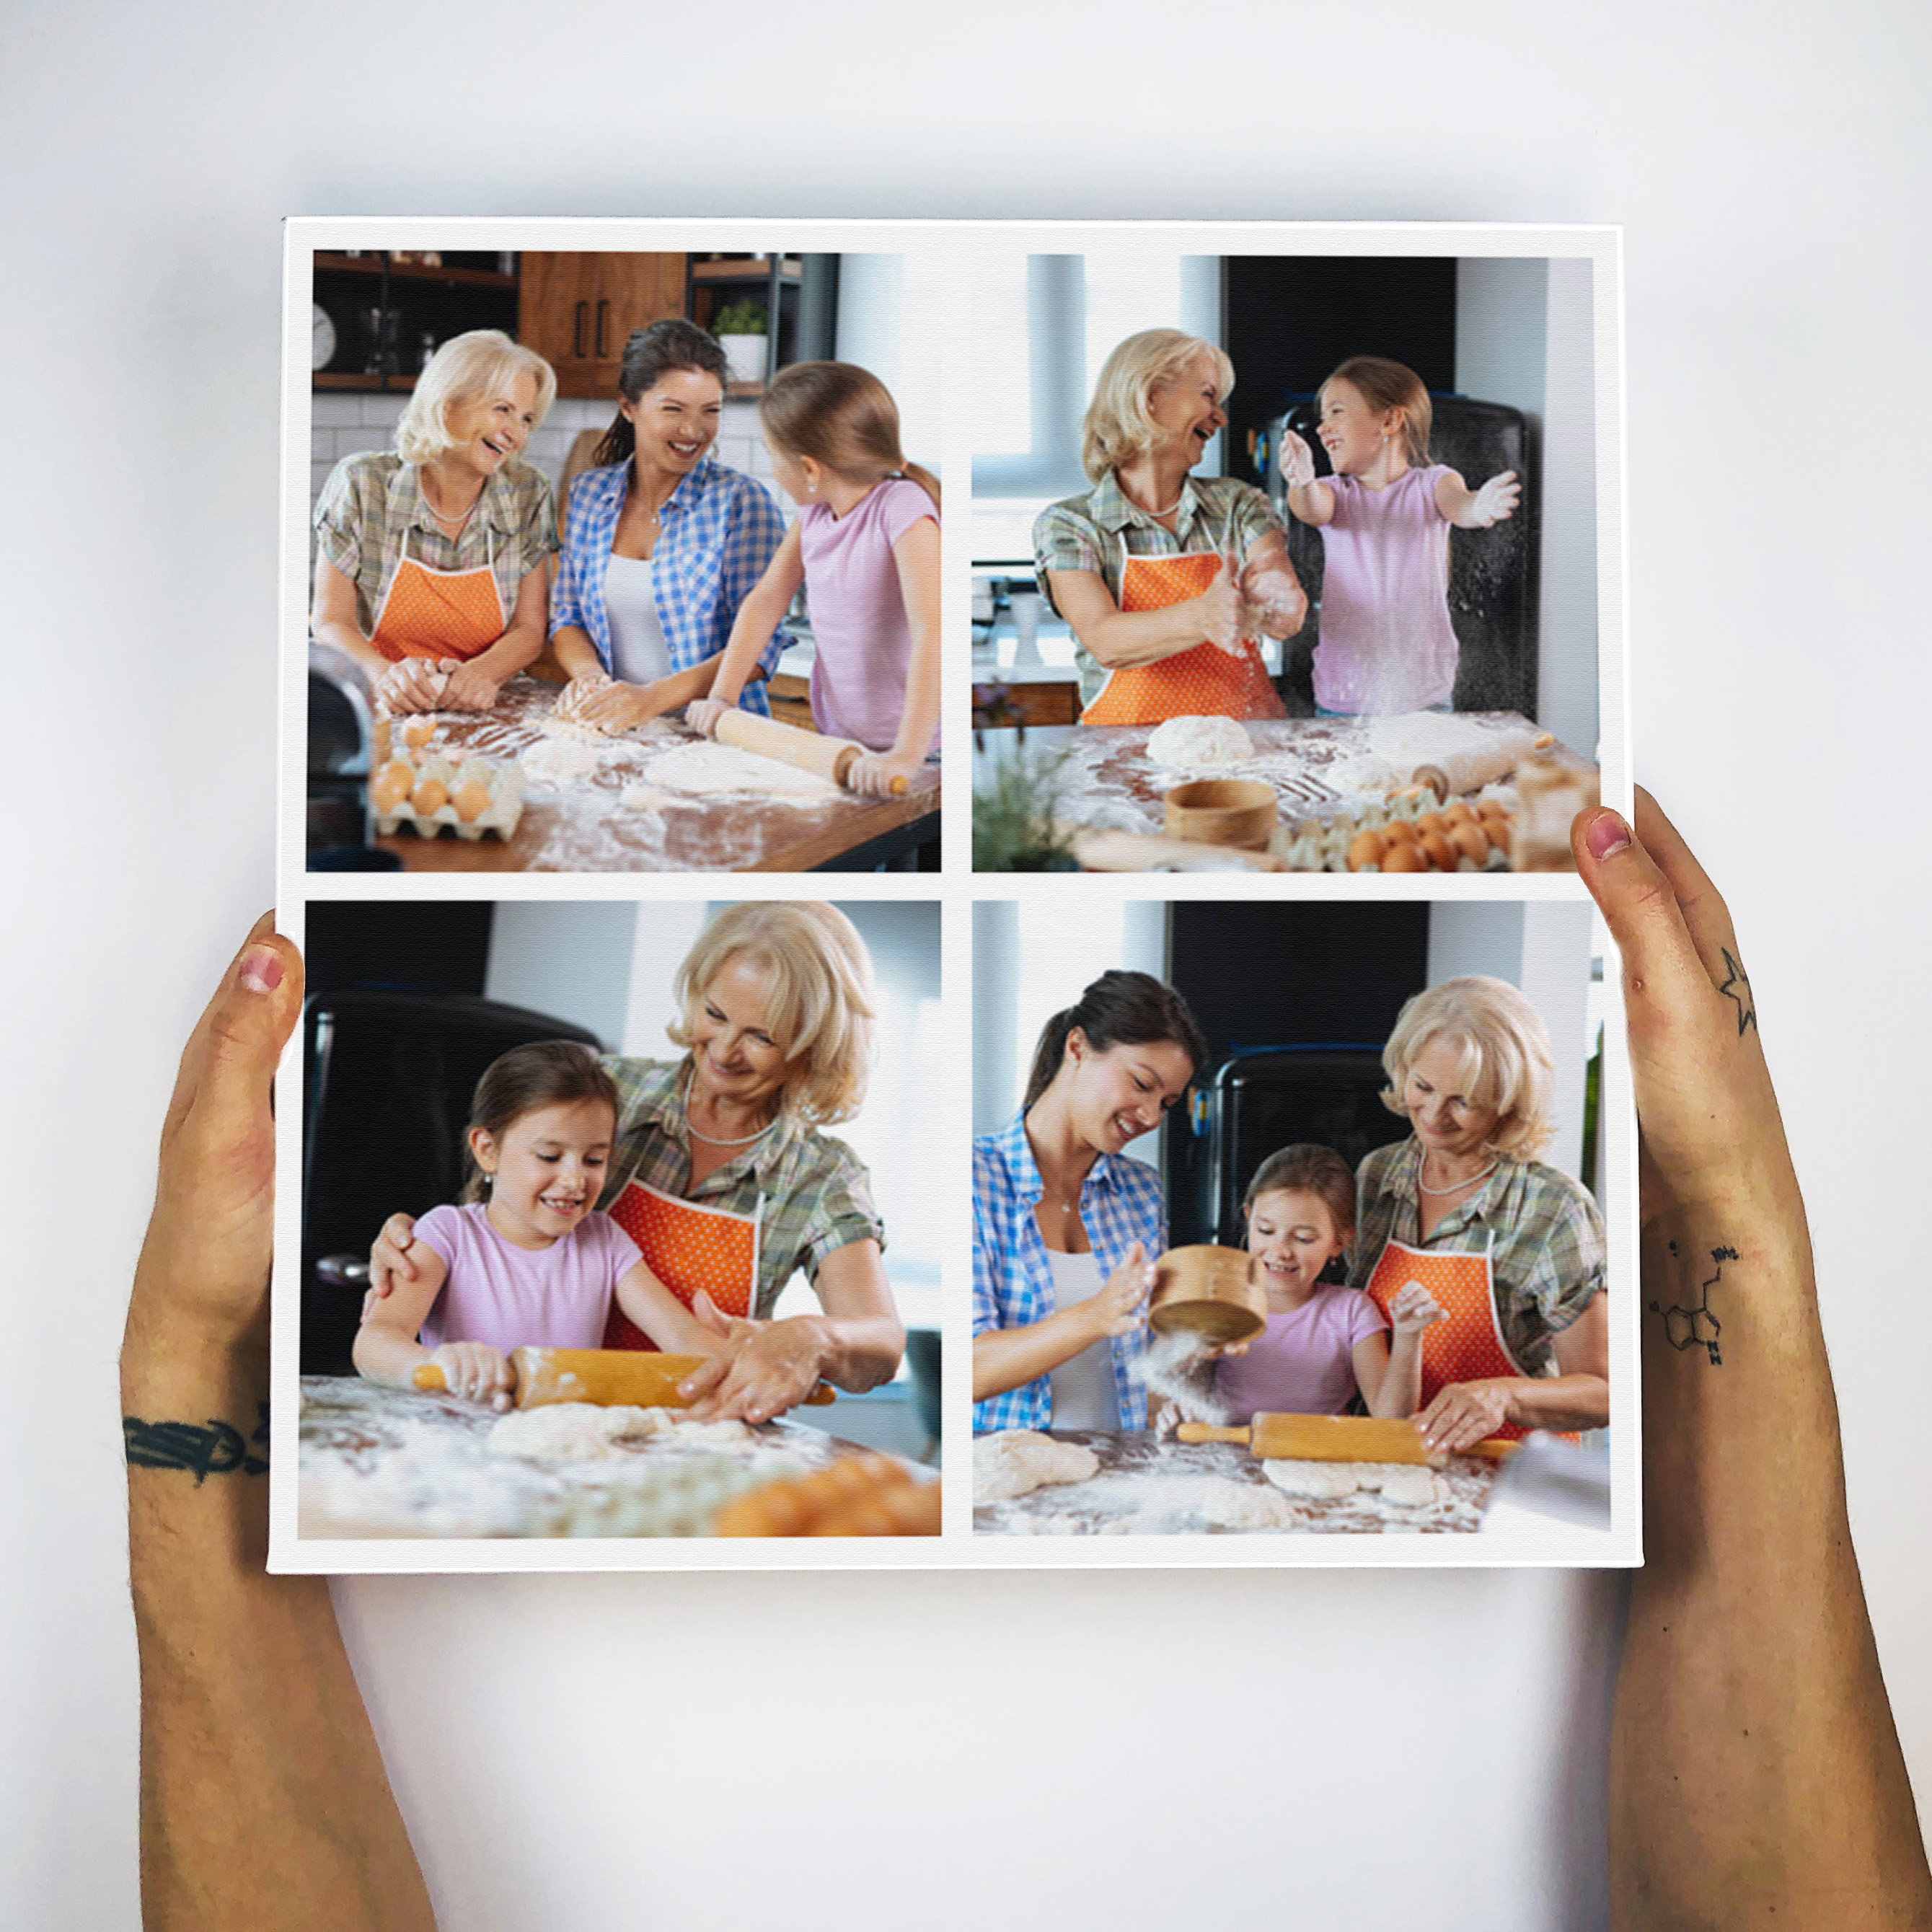 Display your favourite family memories with a personalised collage print to create a thoughtful gift for grandparents and loved ones